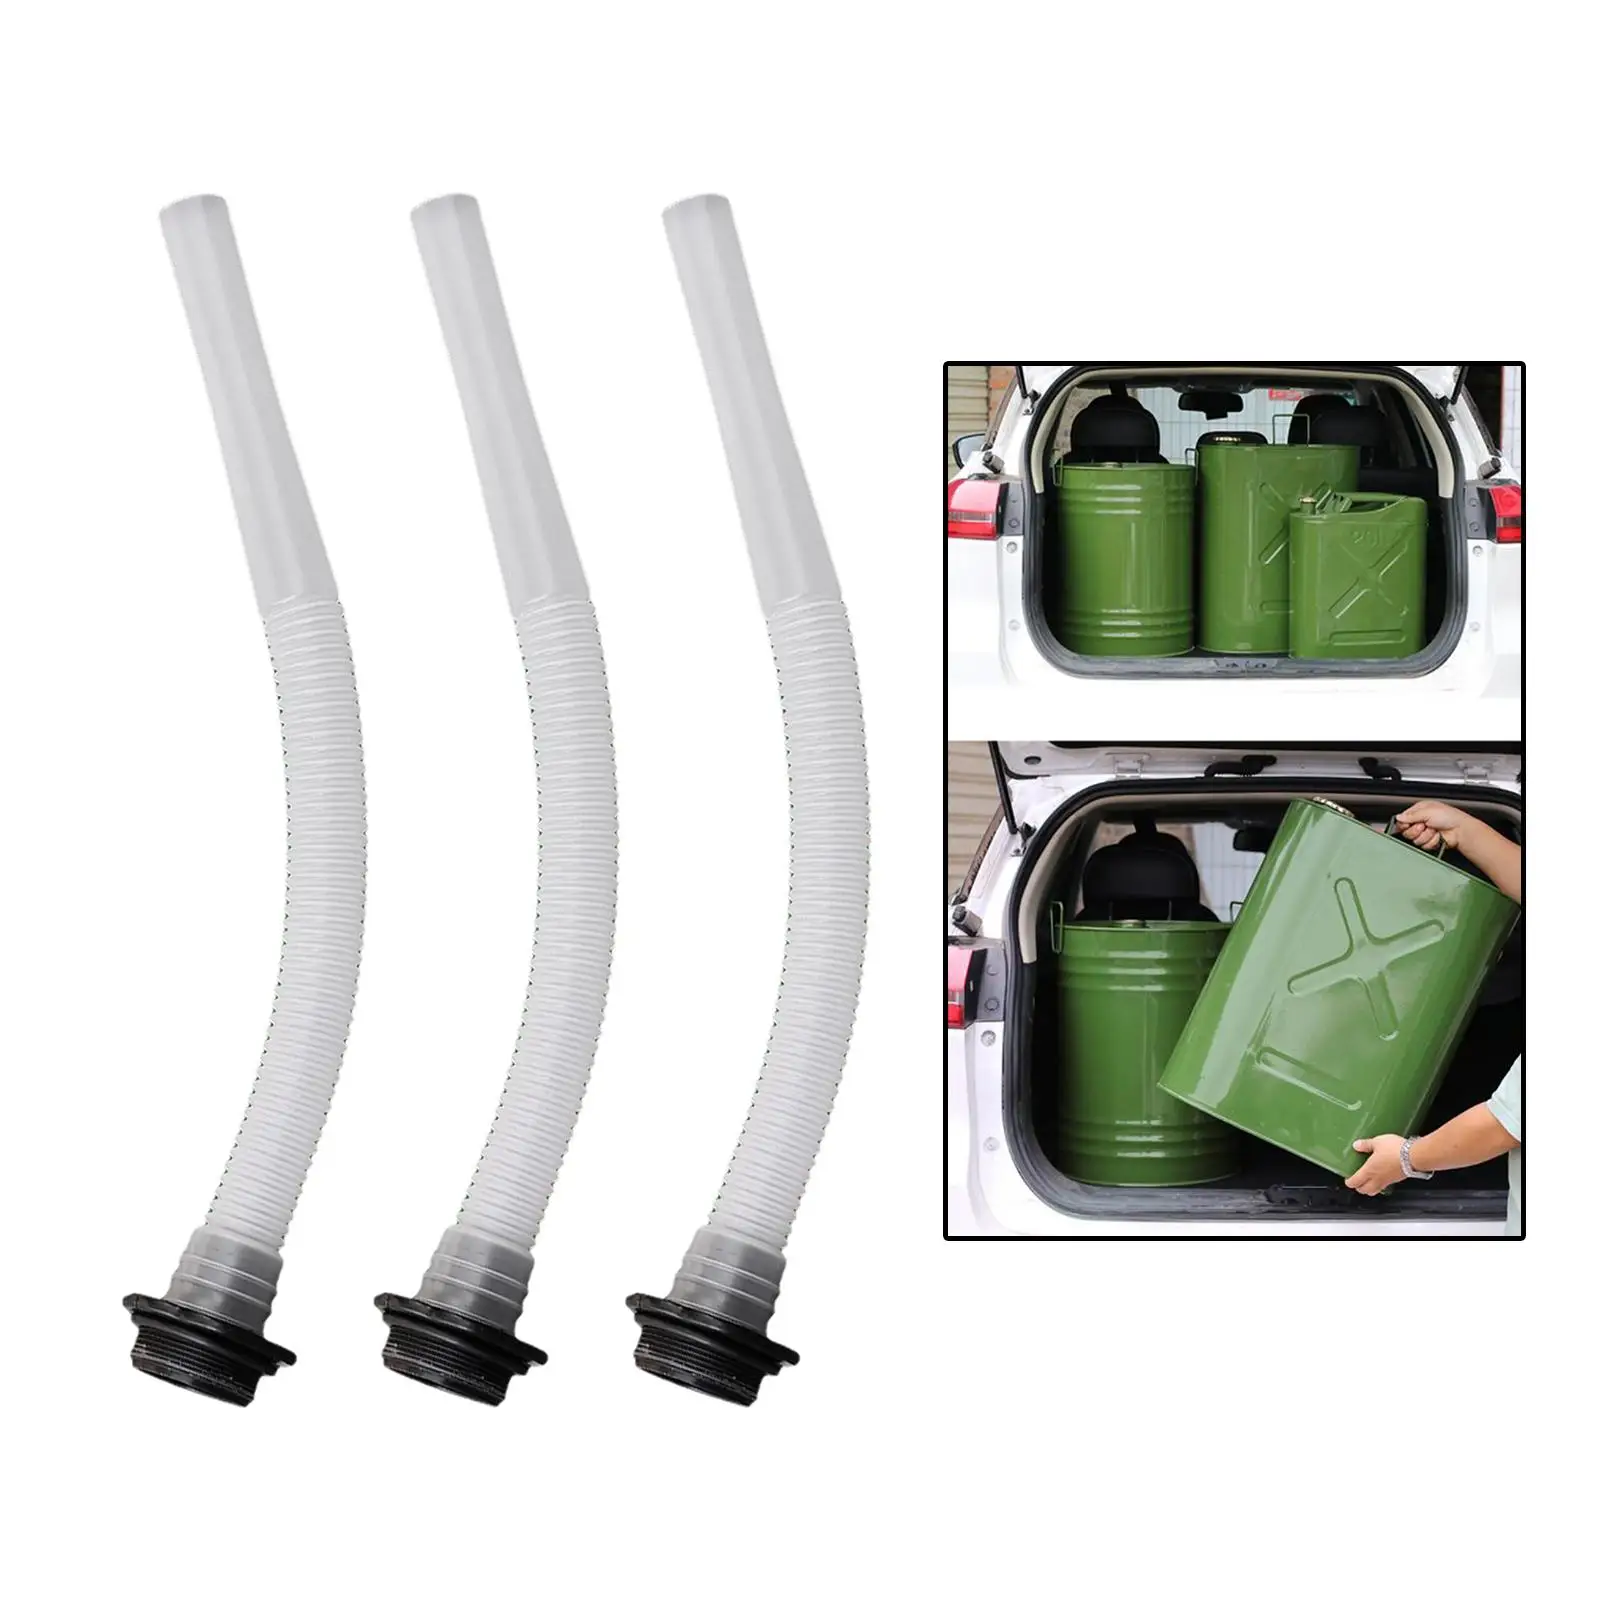 3x Portable Fuel Tank Pouring Nozzle Garage Tool Petrol Can Flexible Tube